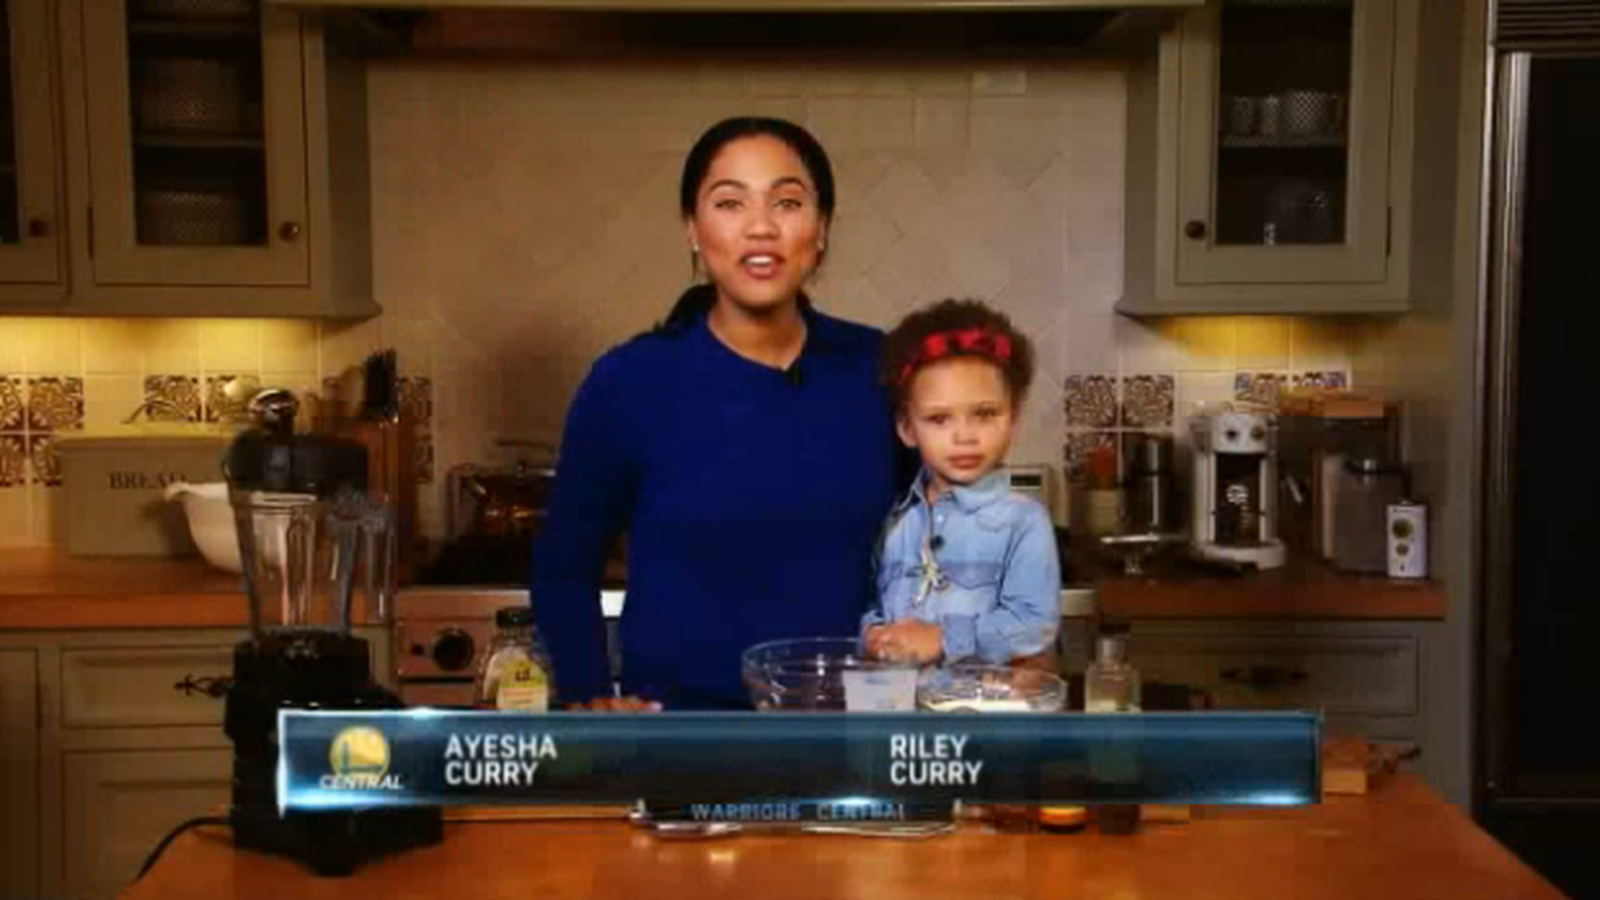 Riley Curry stars in Ayesha Curry's cooking show